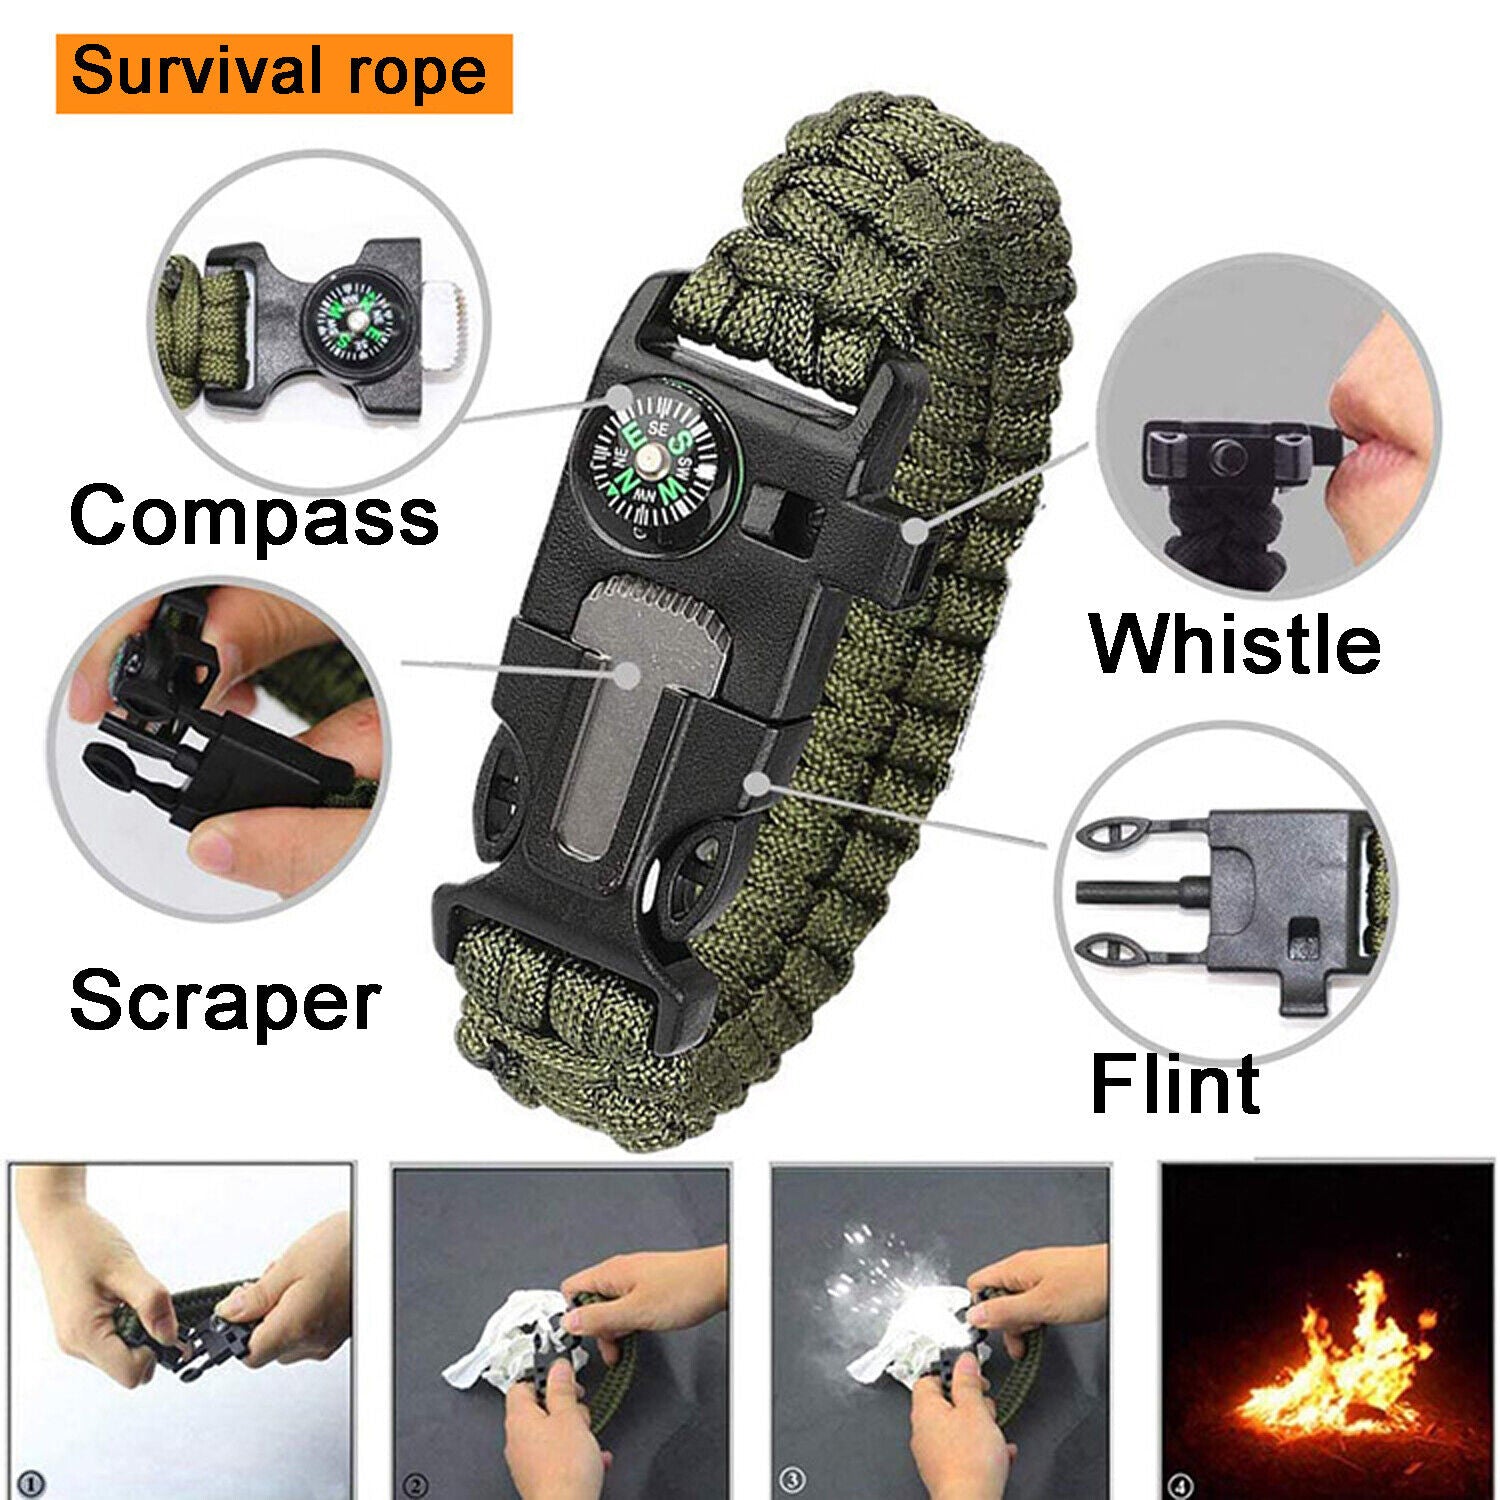 14in1 Outdoor Emergency Survival Gear Kit Camping Hiking Survival Gear Tools Kit Survival Gear And Equipment, Outdoor Fishing Hunting Camping Accessories Lion-Tree